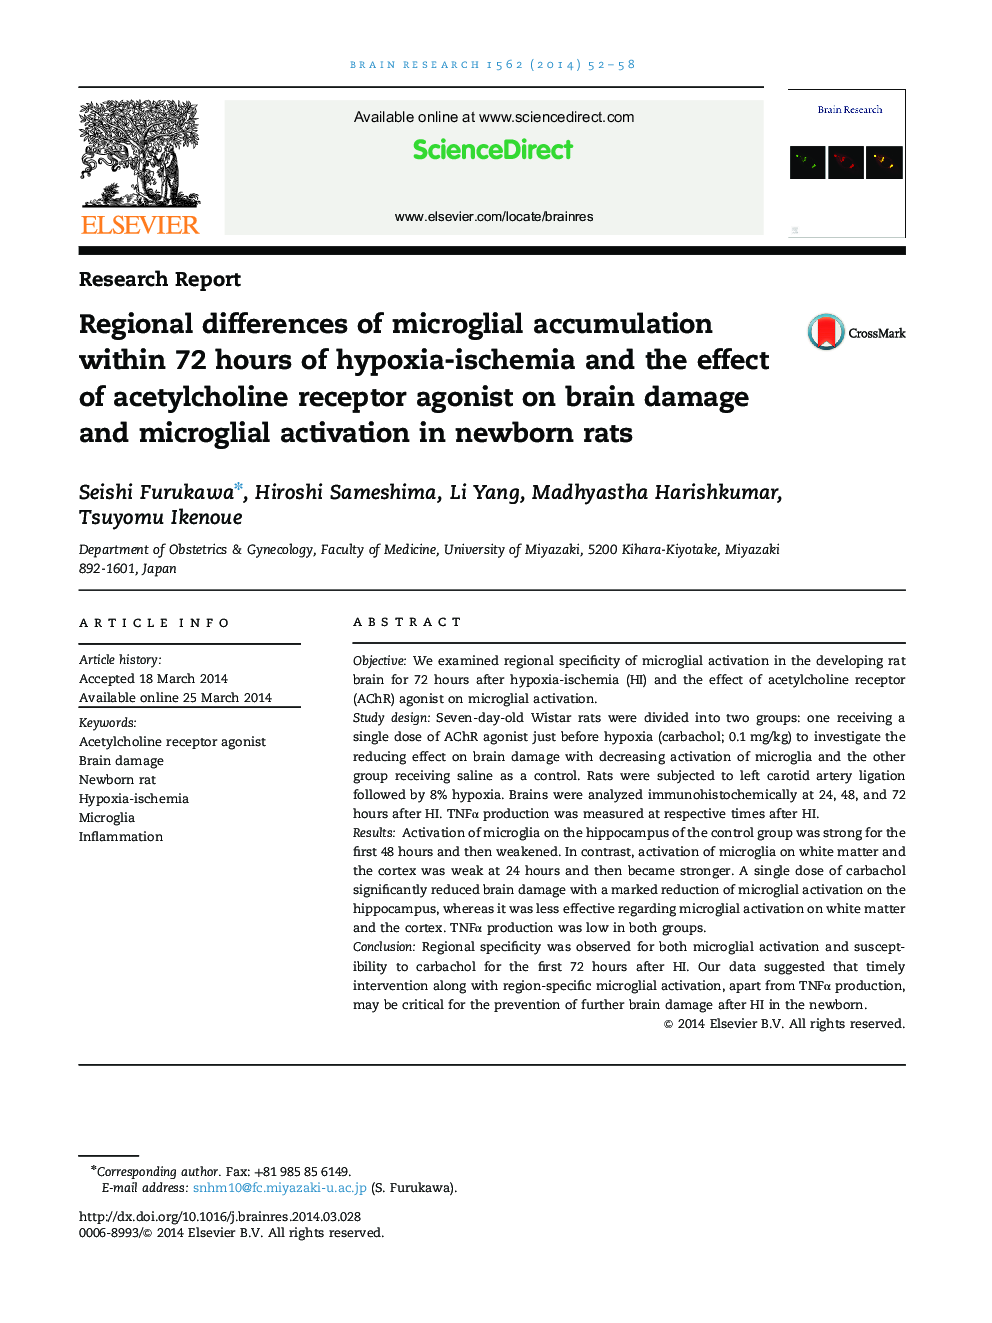 Regional differences of microglial accumulation within 72 hours of hypoxia-ischemia and the effect of acetylcholine receptor agonist on brain damage and microglial activation in newborn rats